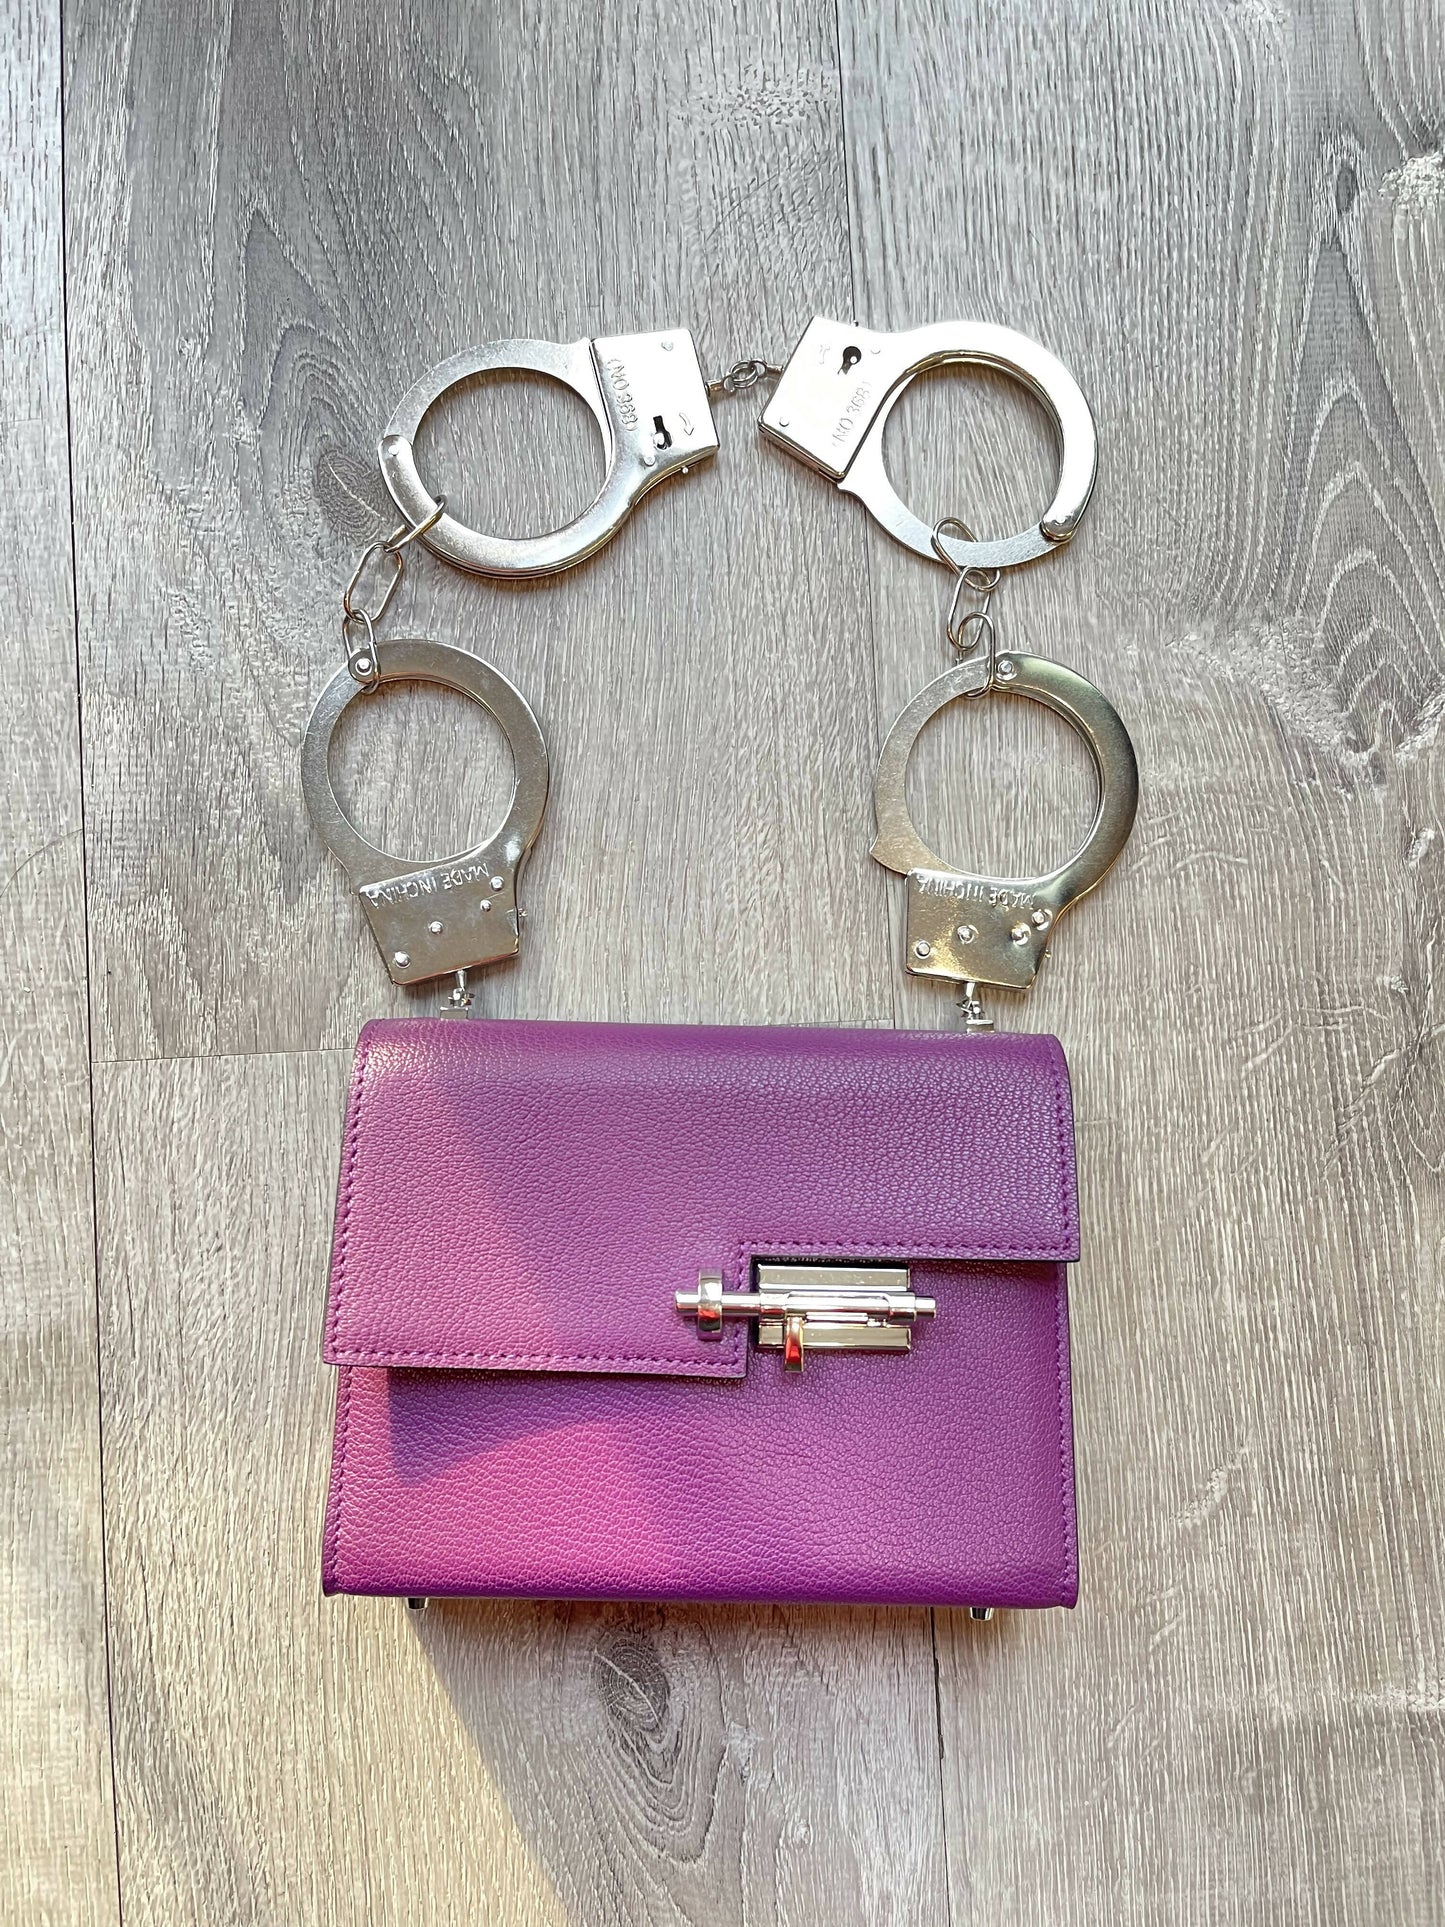 Purple Allure: Vintage-Inspired Leather Bag with Bold Handcuff Handle